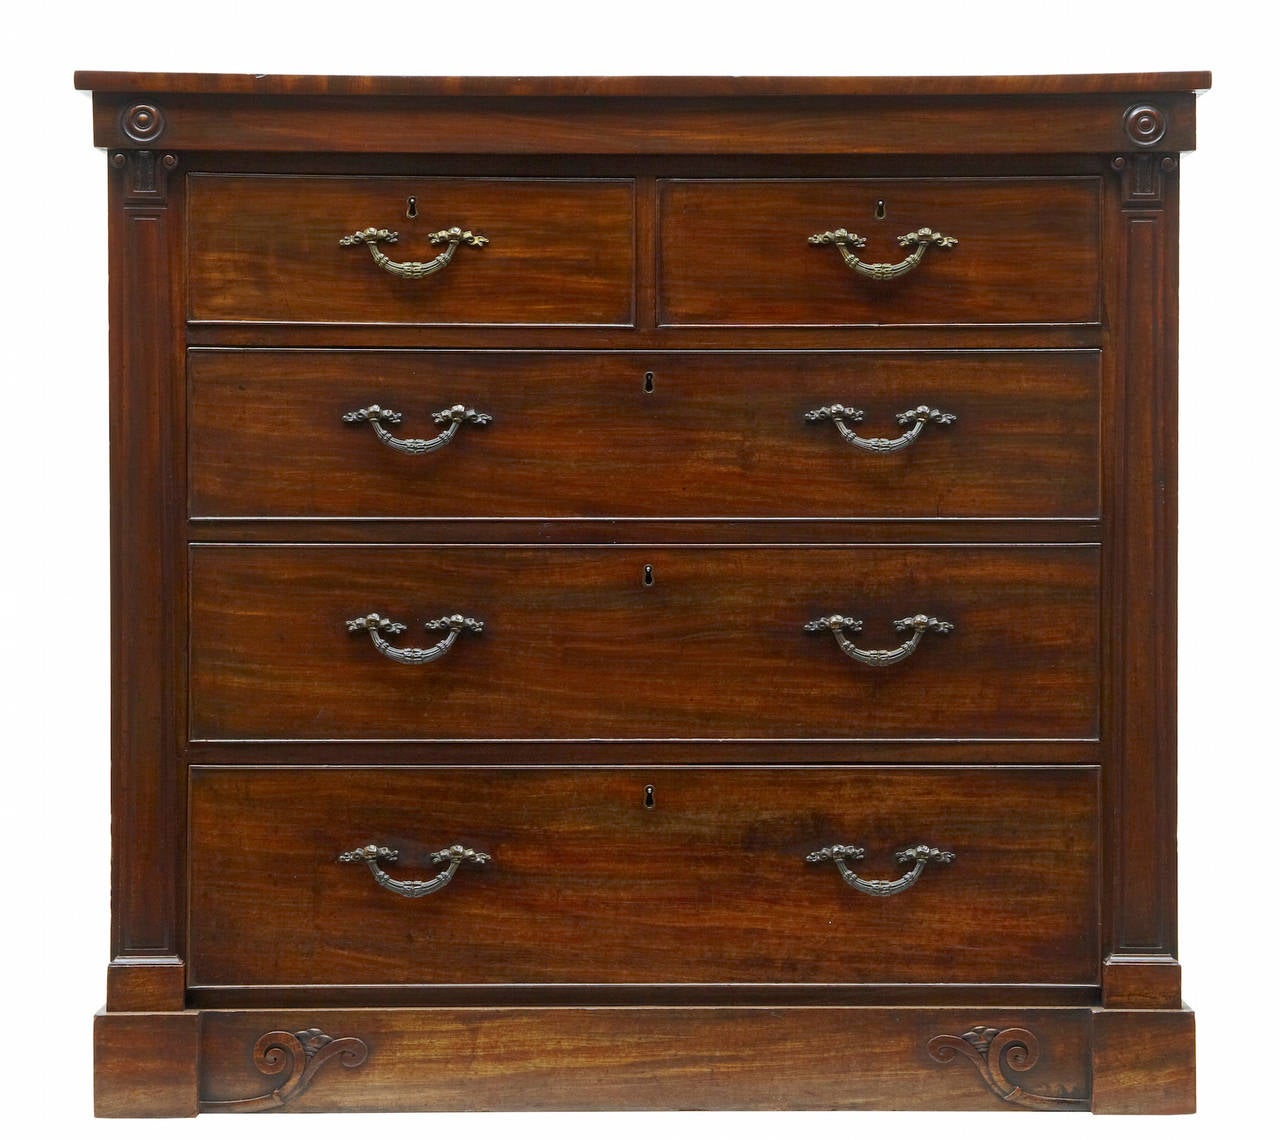 Original unusual handles. 

An identical chest labelled t&g Seddon and bearing the firm's Aldersgate street address and inscribed '1786' and 'Jaime'? Formerly with carlton hobbs ltd., is illustrated in c.Gilbert, marked london furniture 1700-1840,